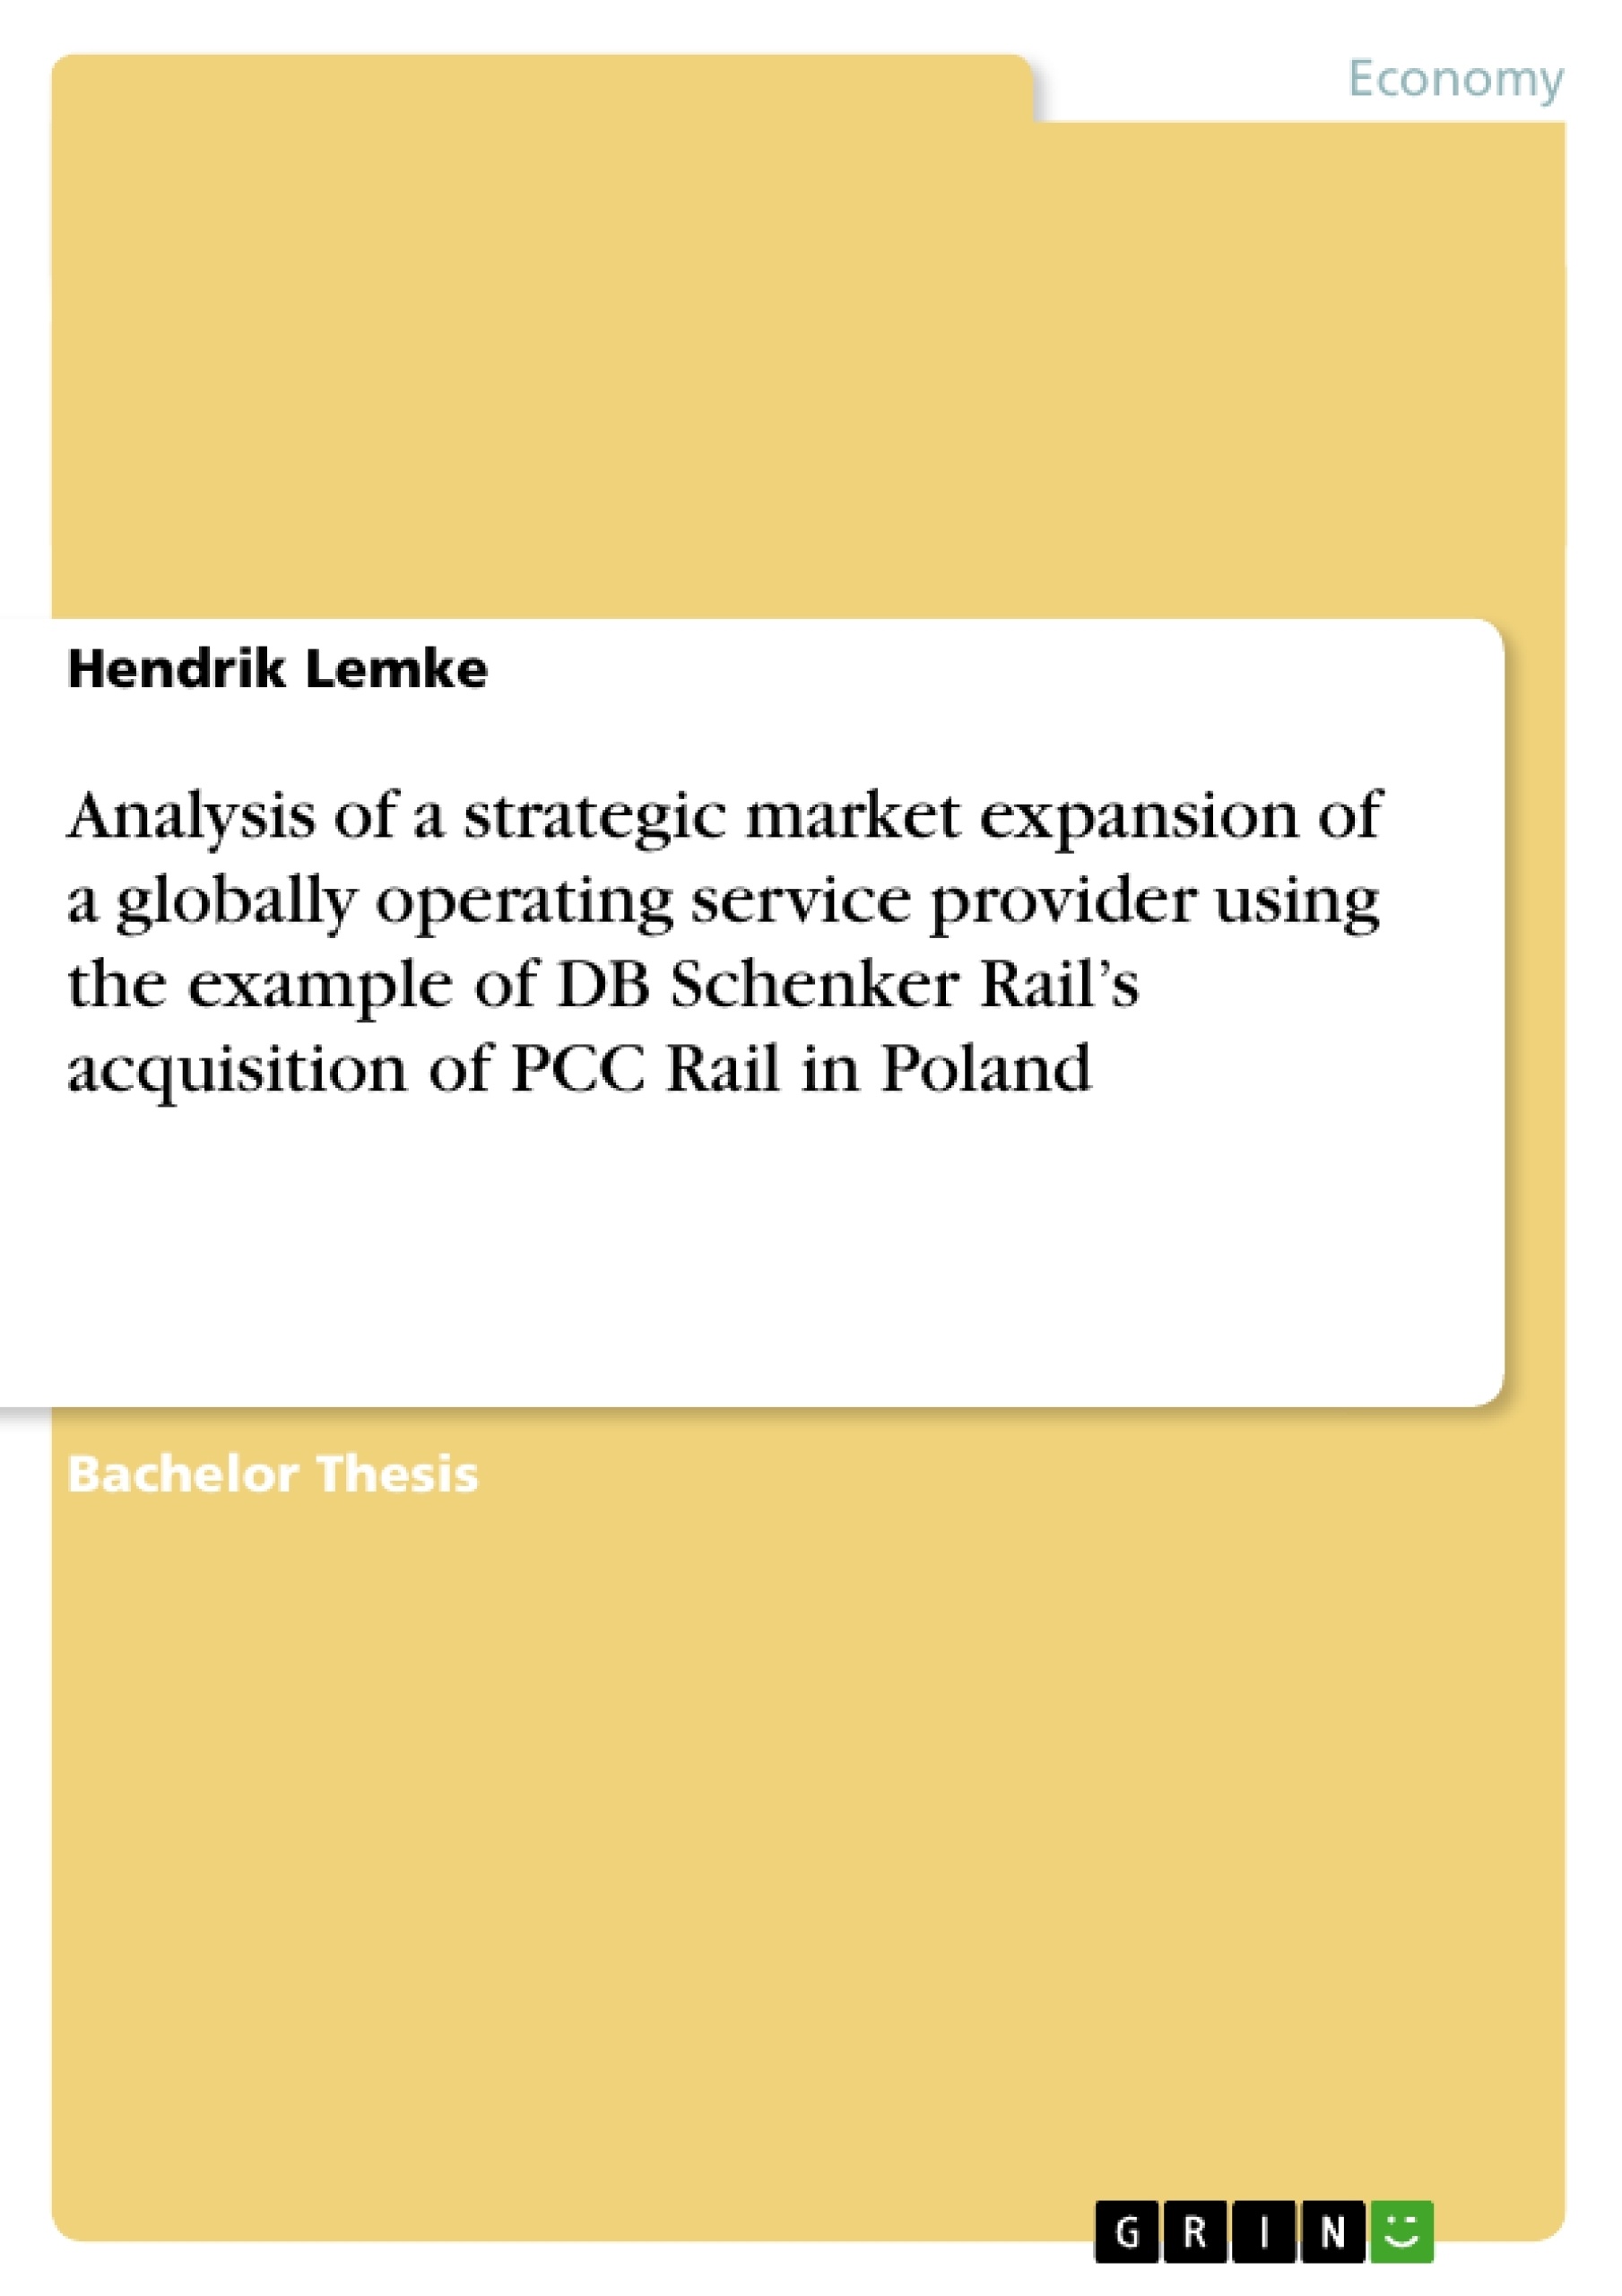 Title: Analysis of a strategic market expansion of a globally operating service provider using the example of DB Schenker Rail’s acquisition of PCC Rail in Poland